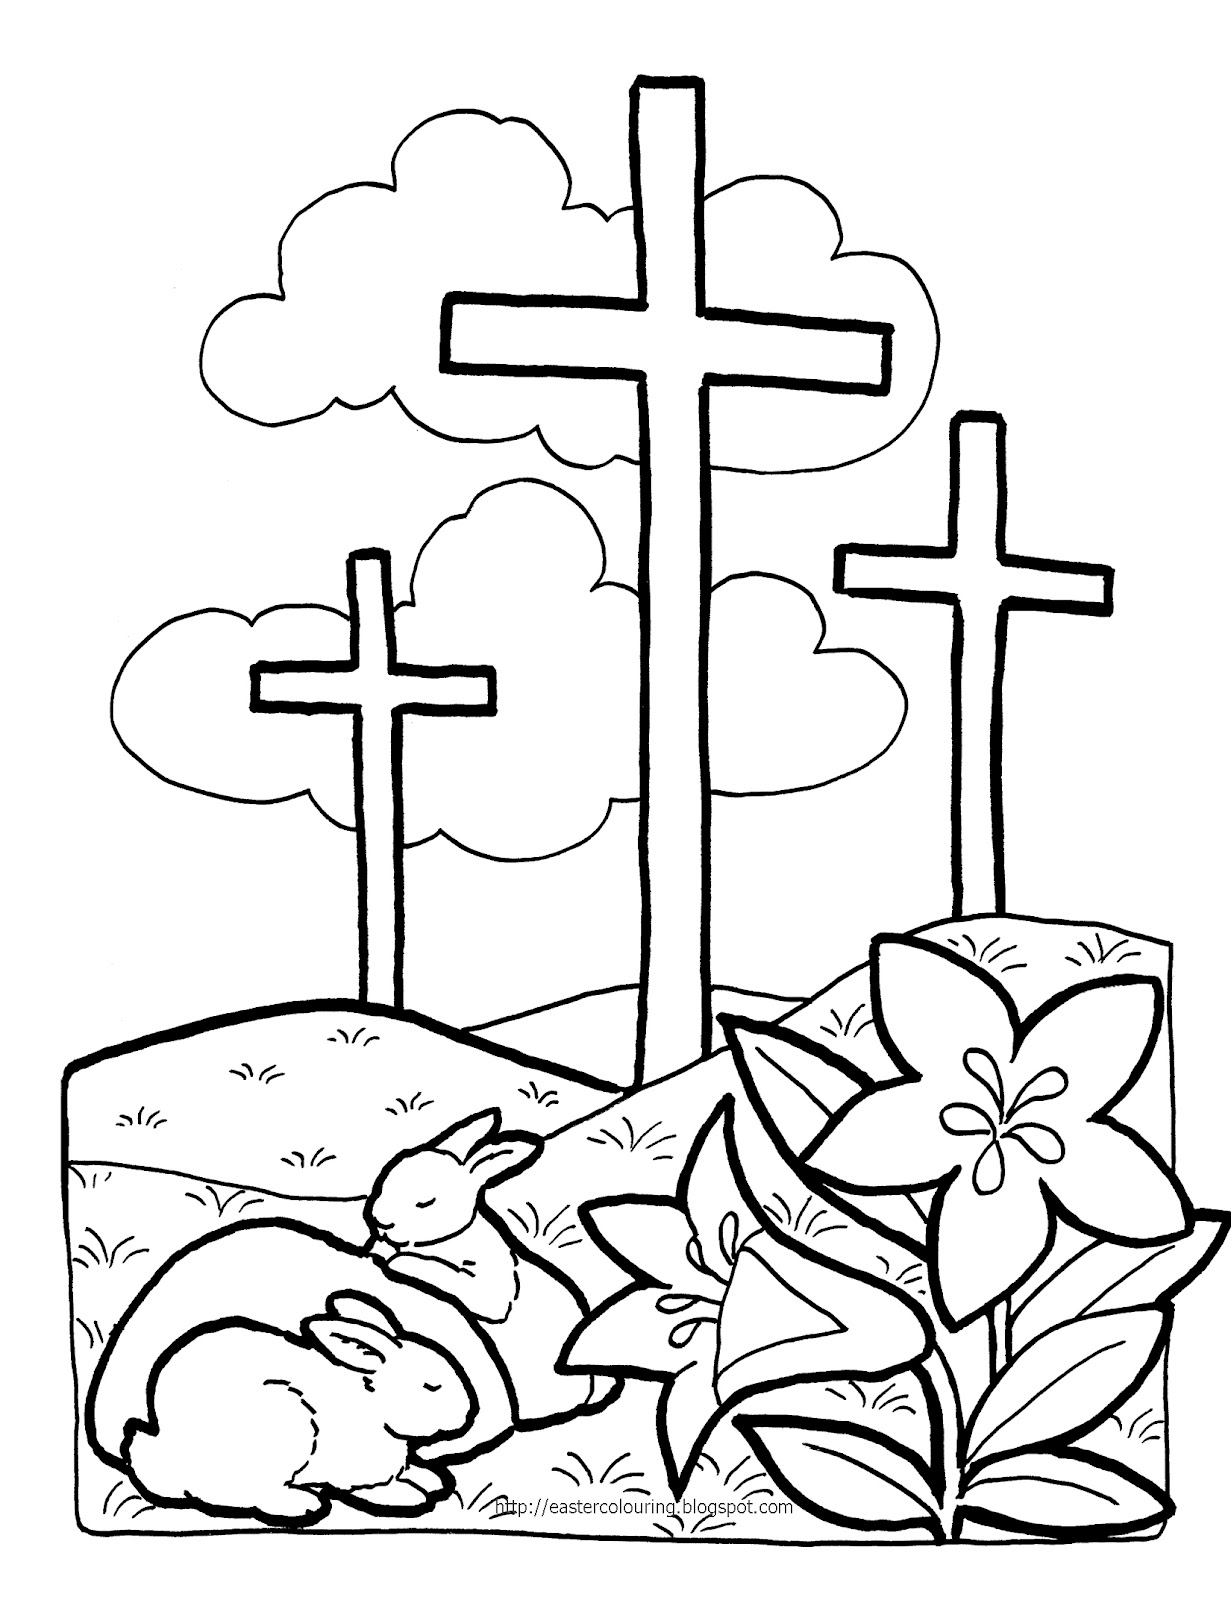 kaboose coloring pages eastern - photo #34